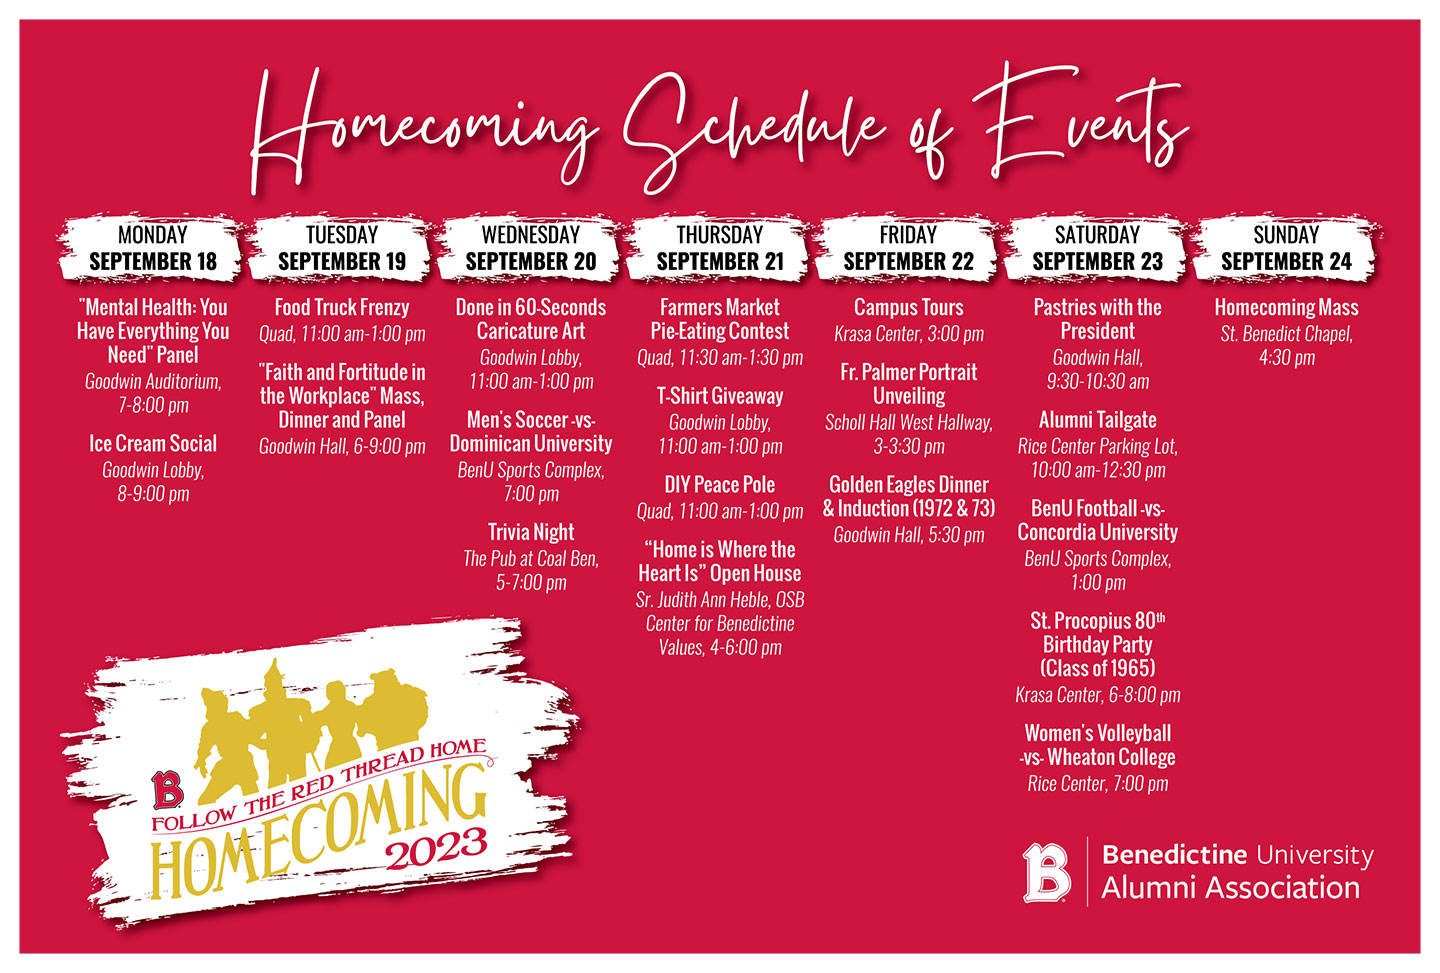 Homecoming 2023 schedule of events